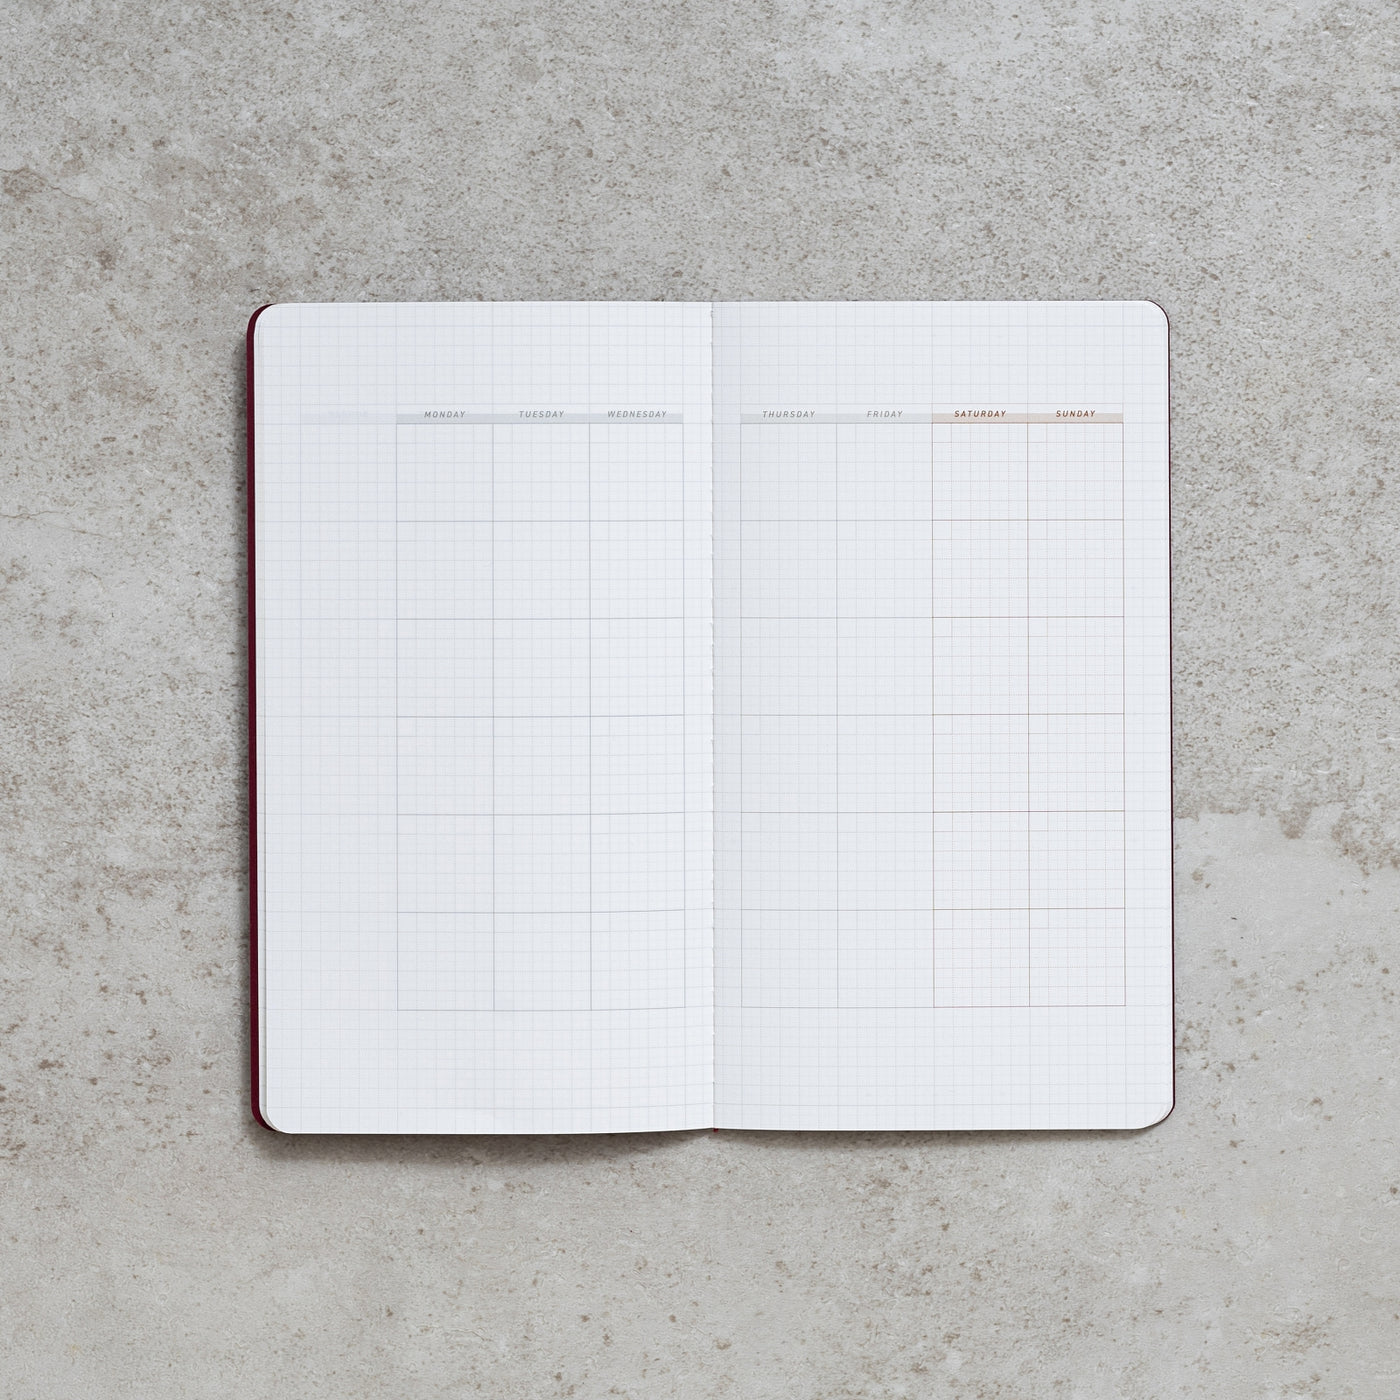 Take a Note "RECORD" - LITE Undated Monthly Planner